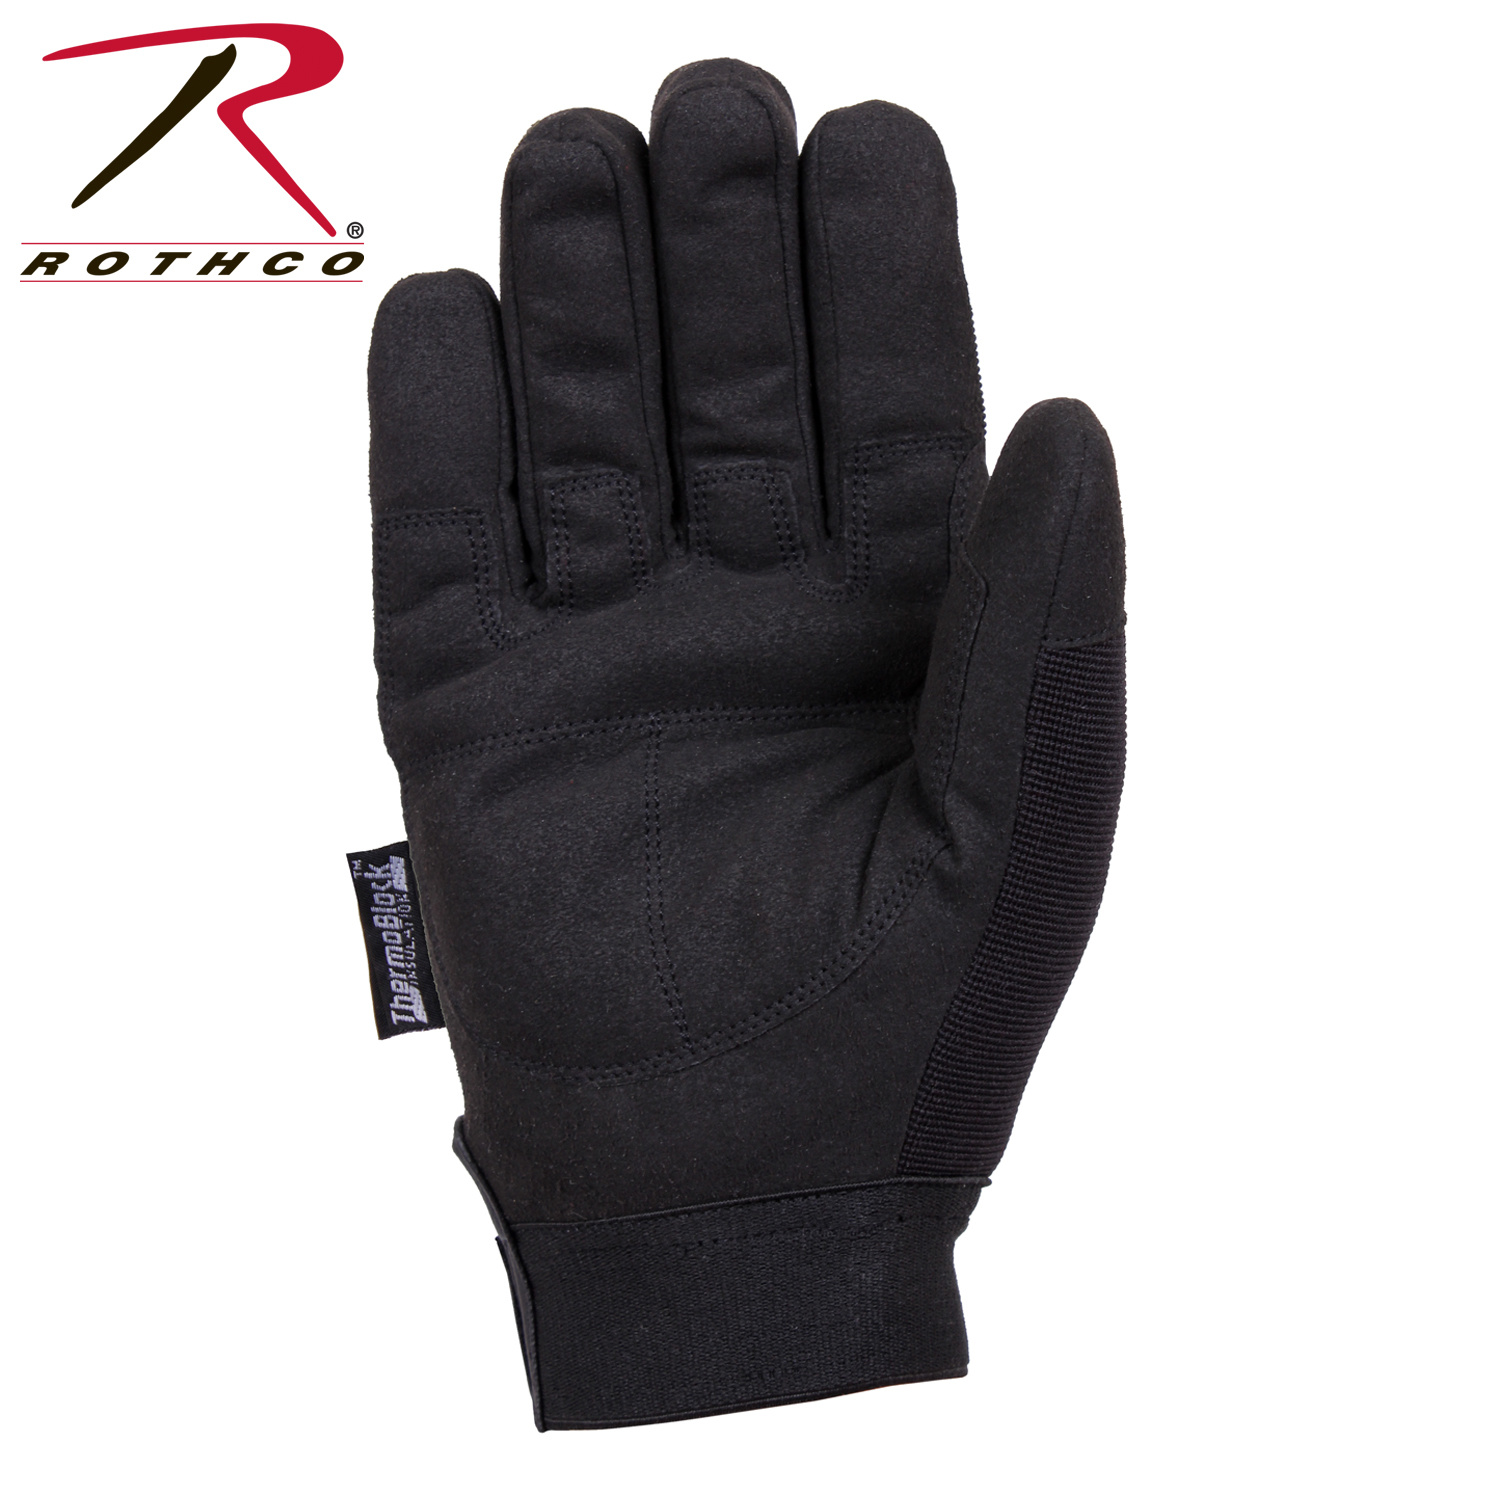 Rothco Rothco Cold Weather All Purpose Gloves-Black